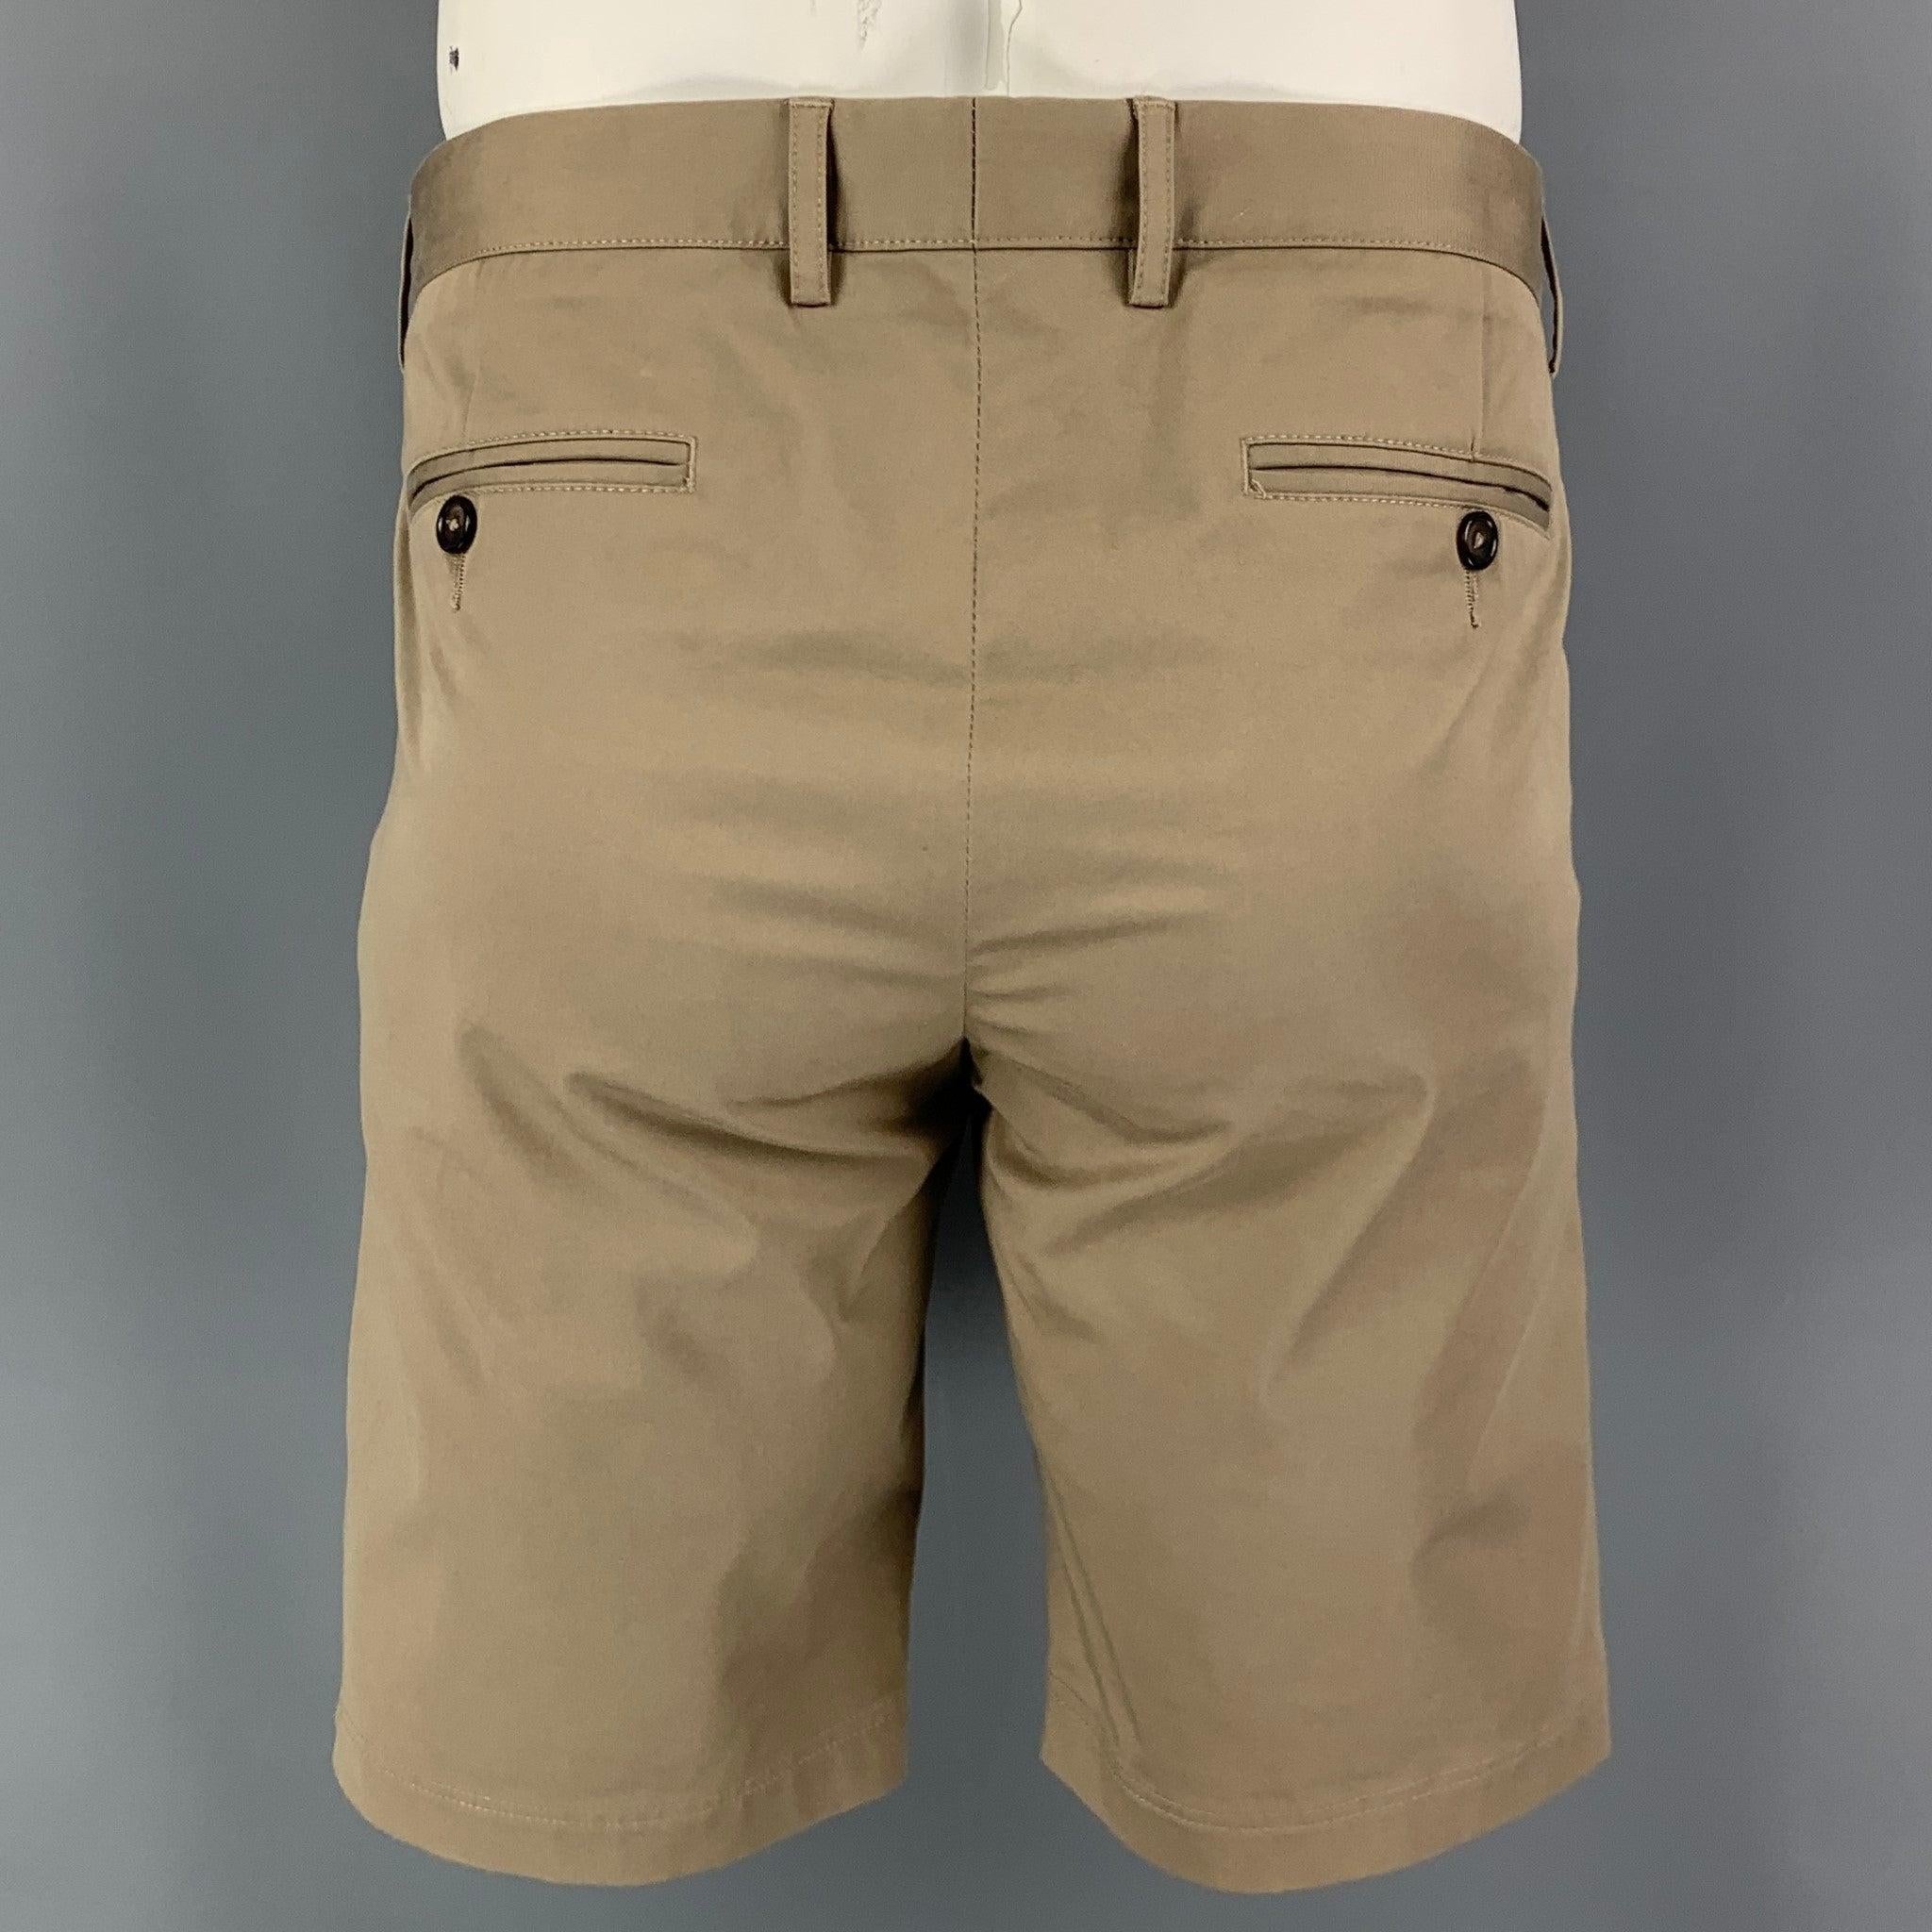 DOLCE & GABBANA shorts comes in a khaki cotton featuring a chino style and a zip fly closure. Made in Italy. Excellent Pre-Owned Condition. 

Marked:   52 

Measurements: 
  Waist: 36 inches Rise: 9 inches Inseam: 10 inches Leg Opening: 20 inches 
 